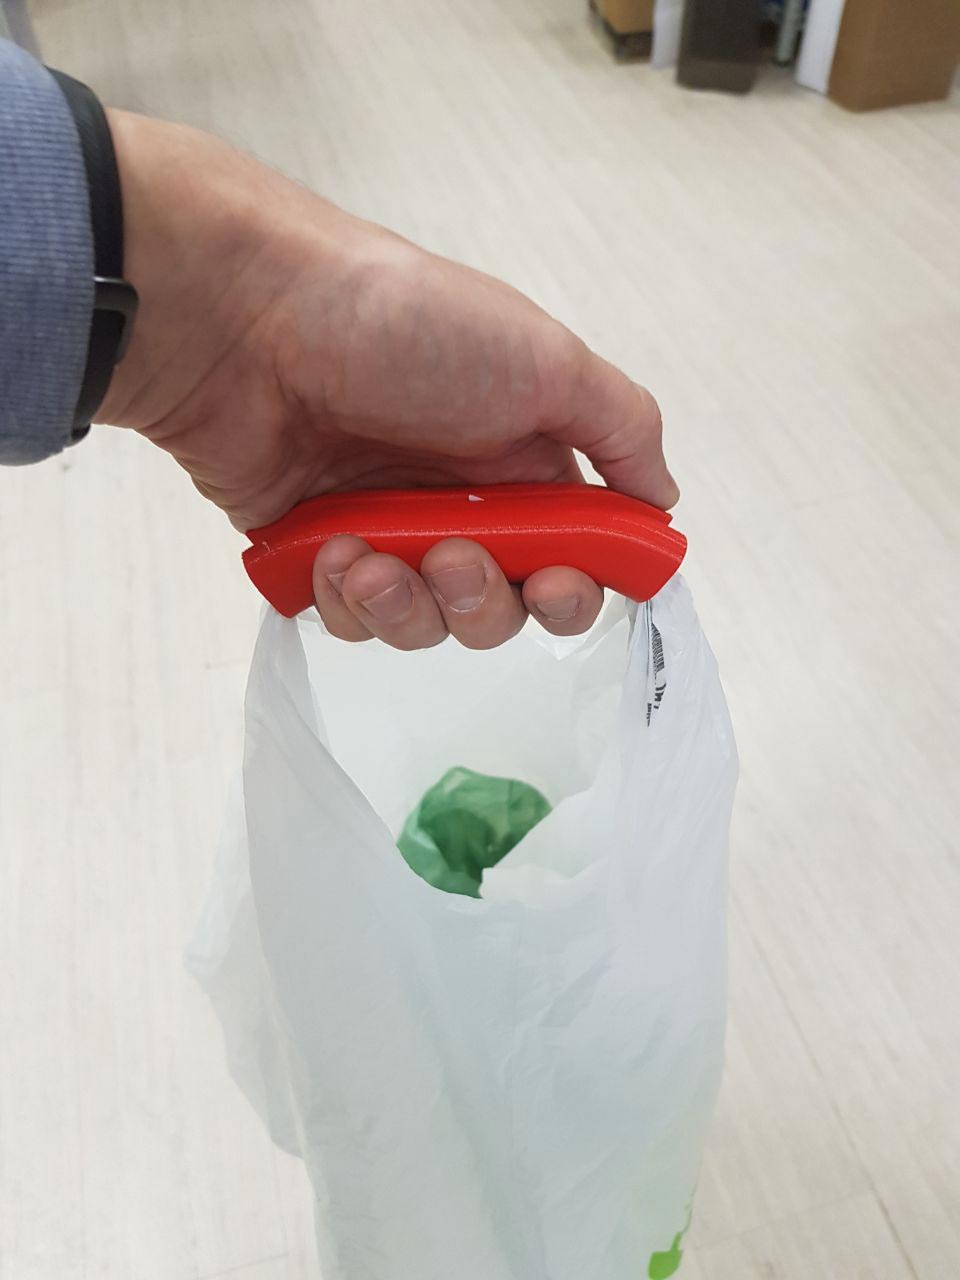 3D printed handle - a usefull thing for shopping 1